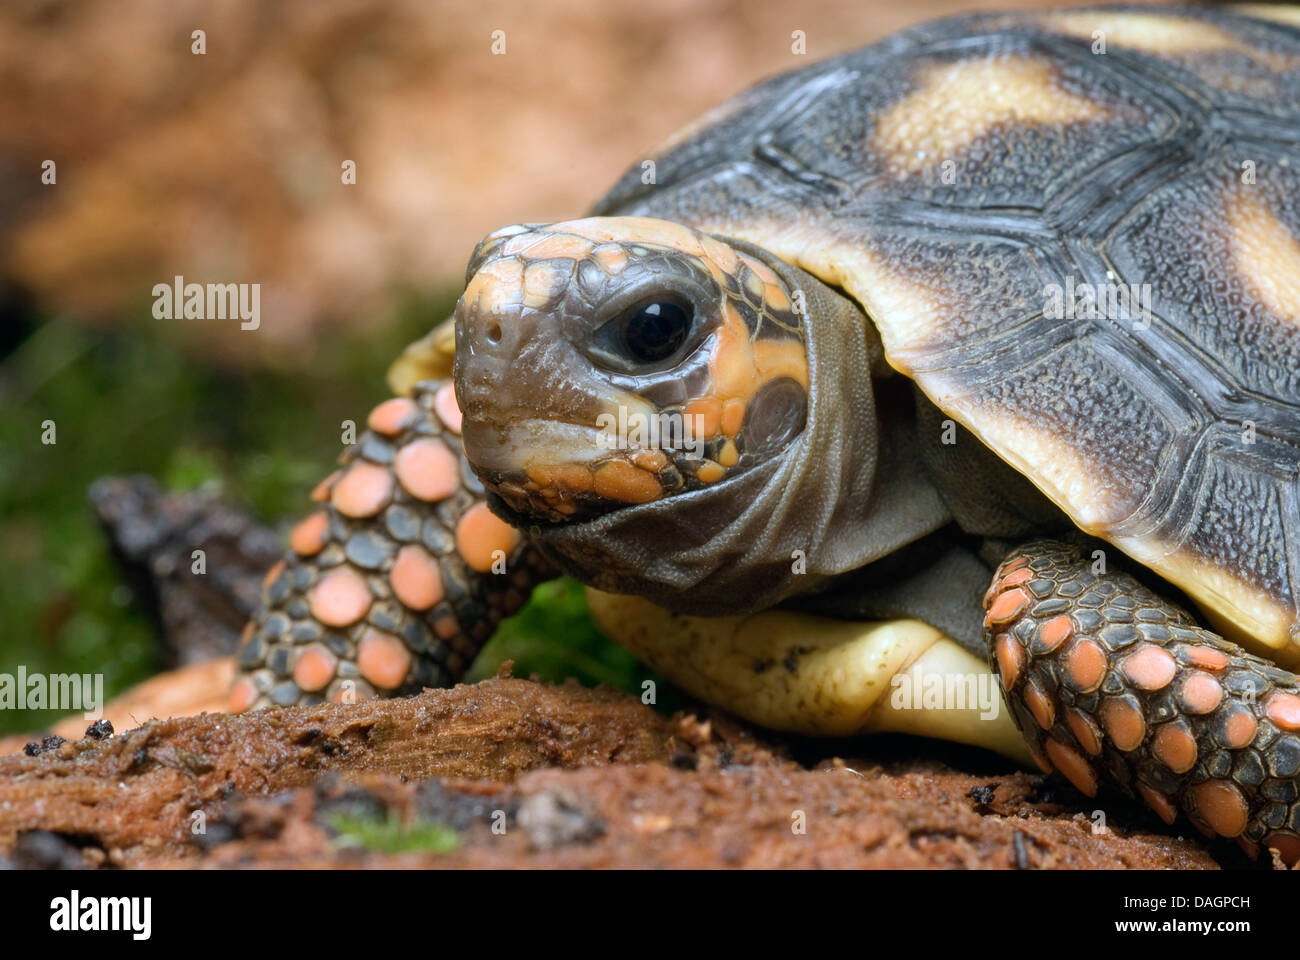 Red-footed tortoise, South American red-footed tortoise, Coal tortoise (Geochelone carbonaria, Testudo carbonaria, Chelonoidis carbonaria), portrait Stock Photo